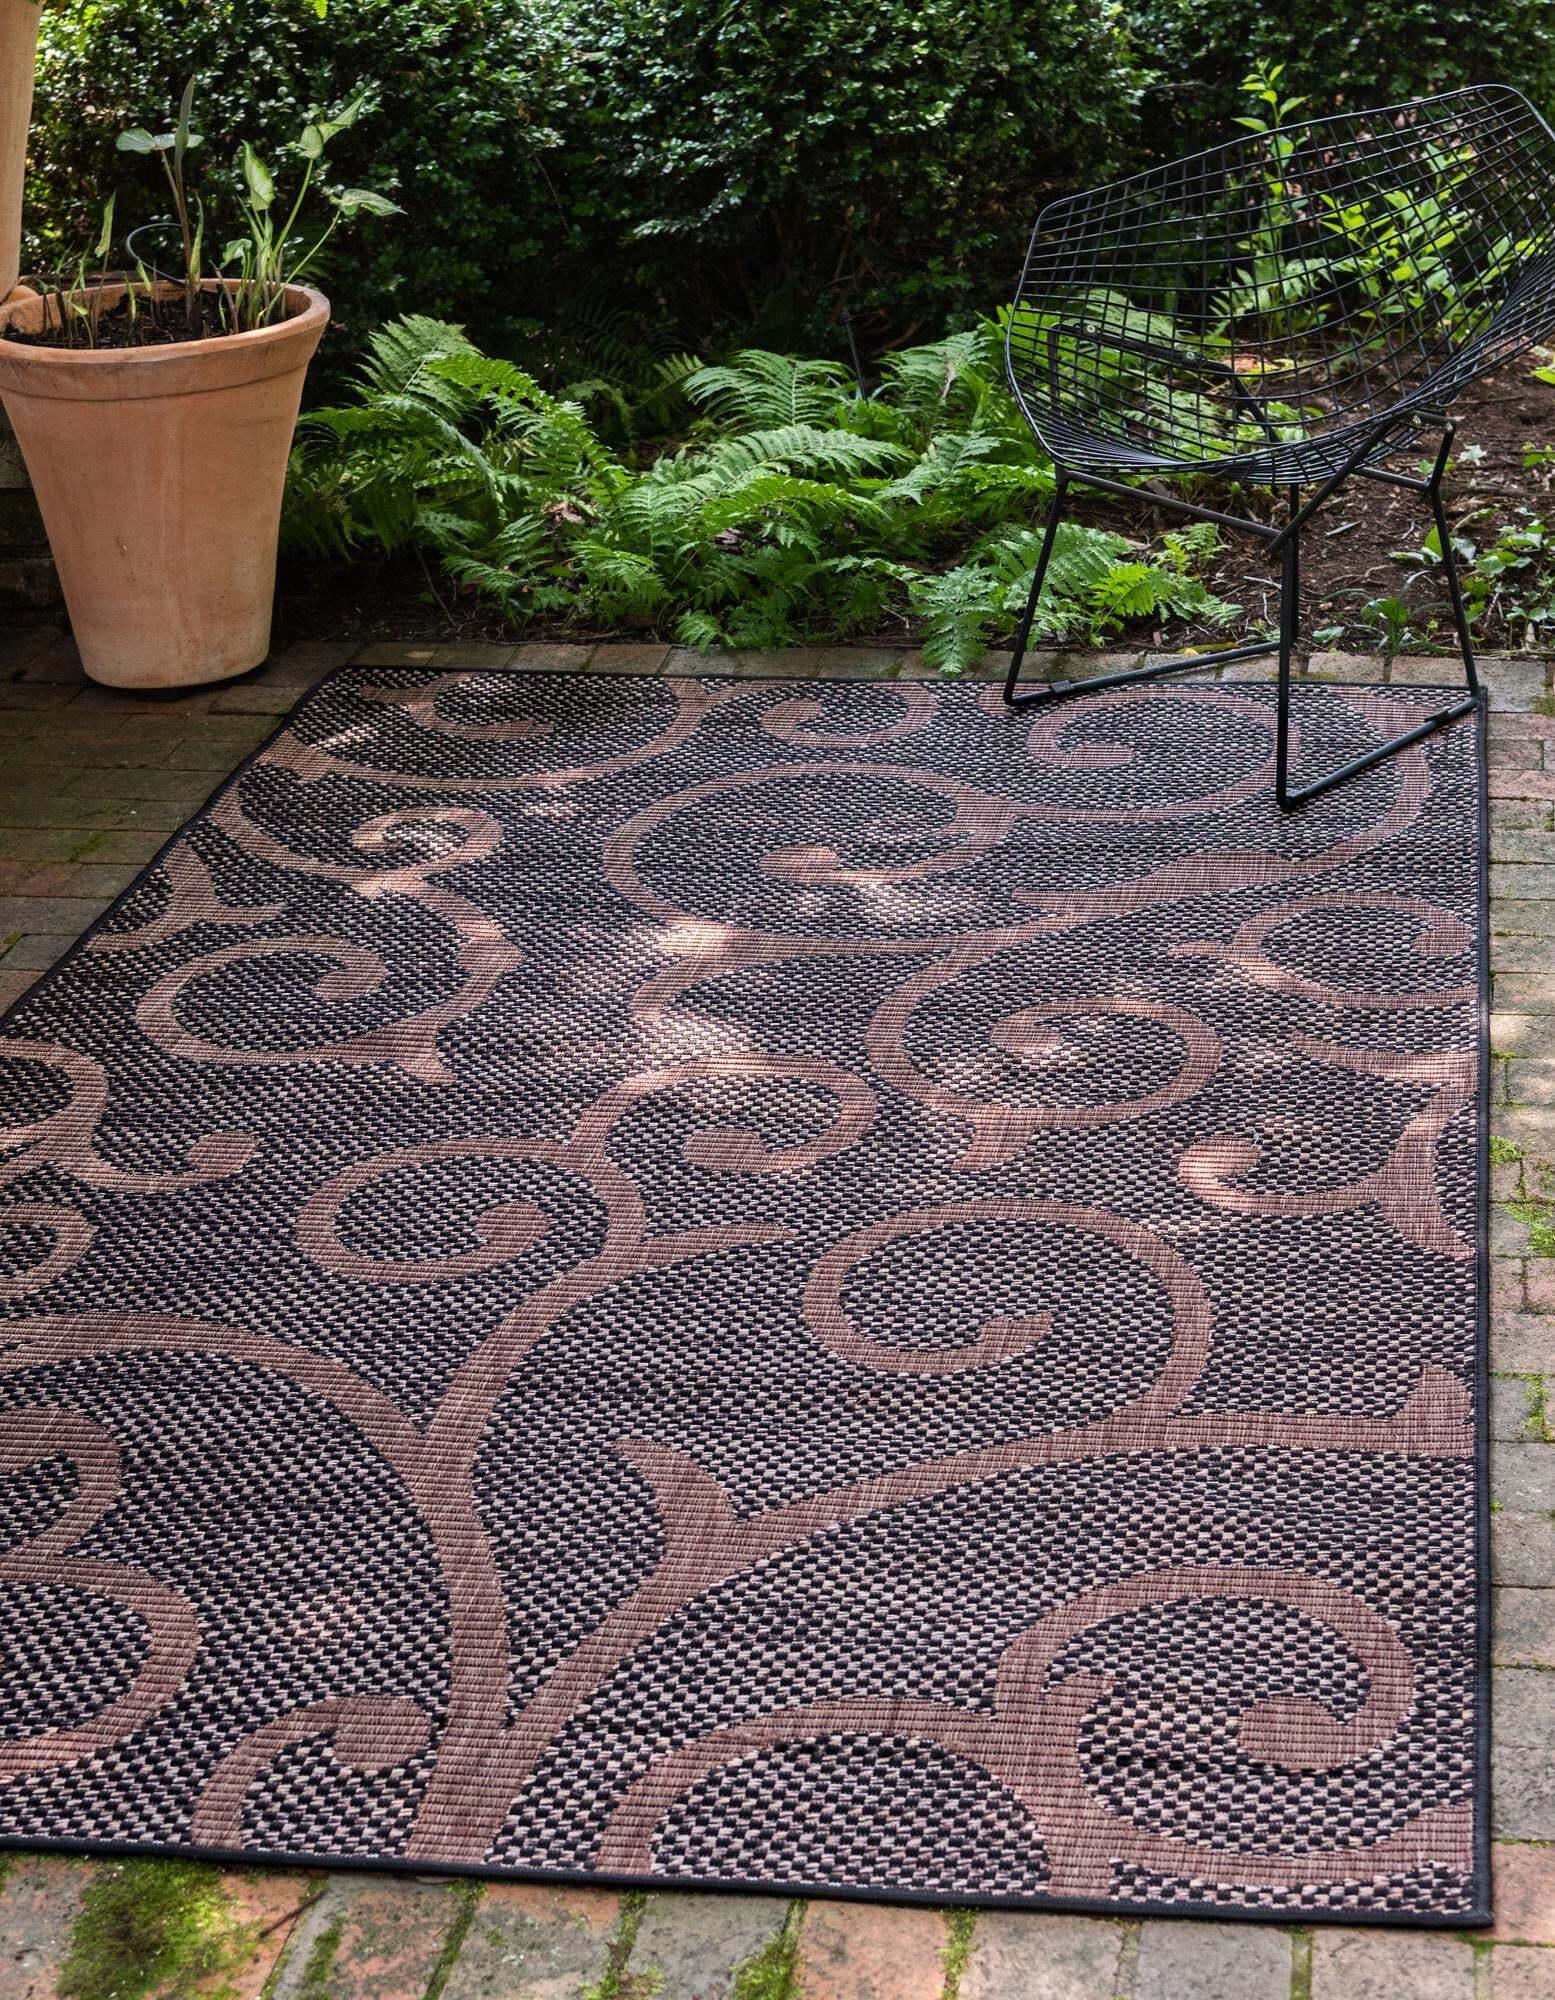 Unique Loom Outdoor Rugs - Outdoor Botanical Damask Rectangular 9x12 Rug Chocolate Brown & Black